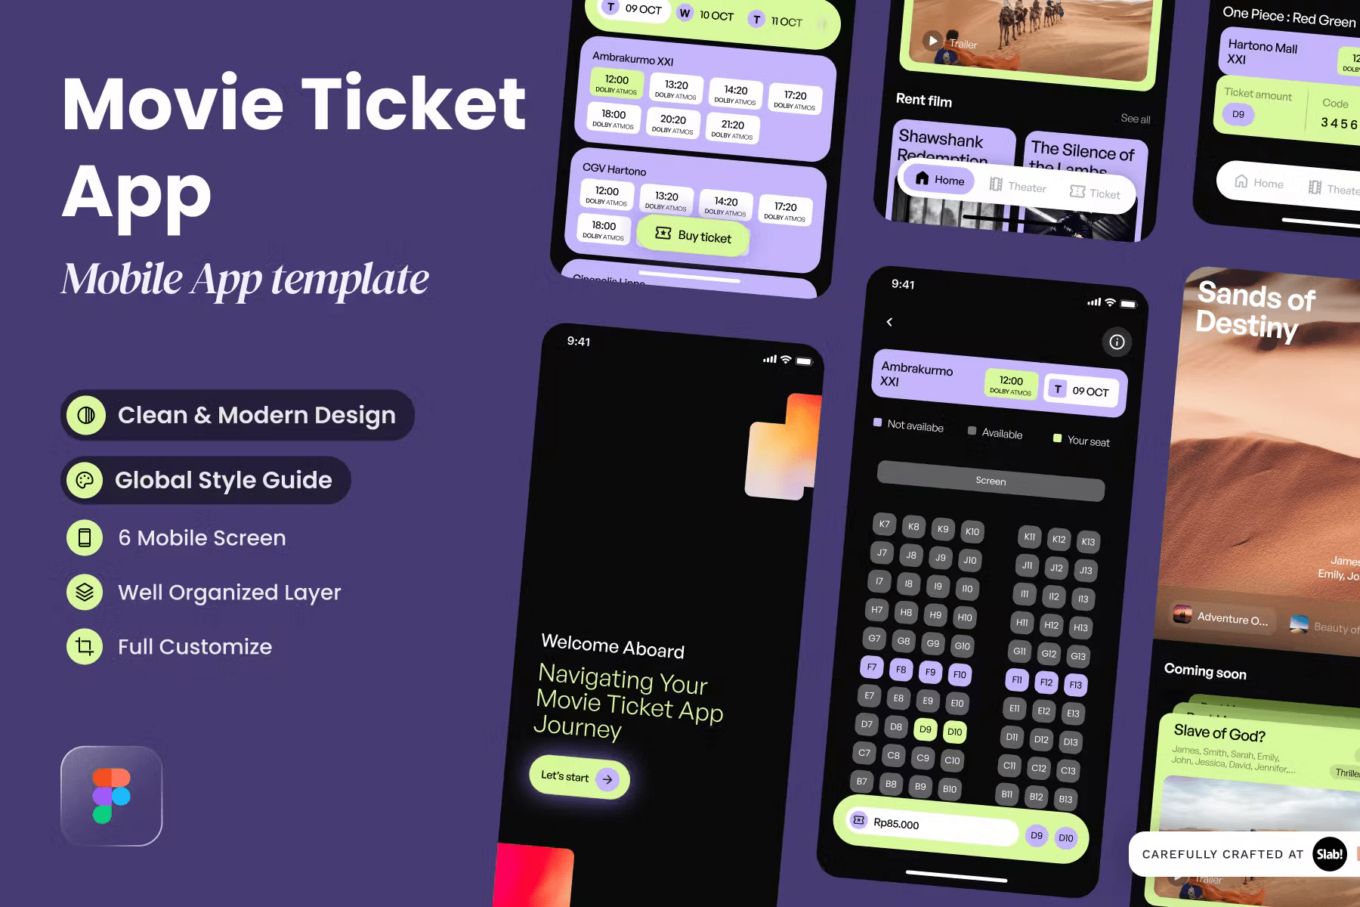 Screenshot from FlickTix - Movie Ticket Mobile App by slabdsgn, one of Cynthia's favorite graphics Authors. 